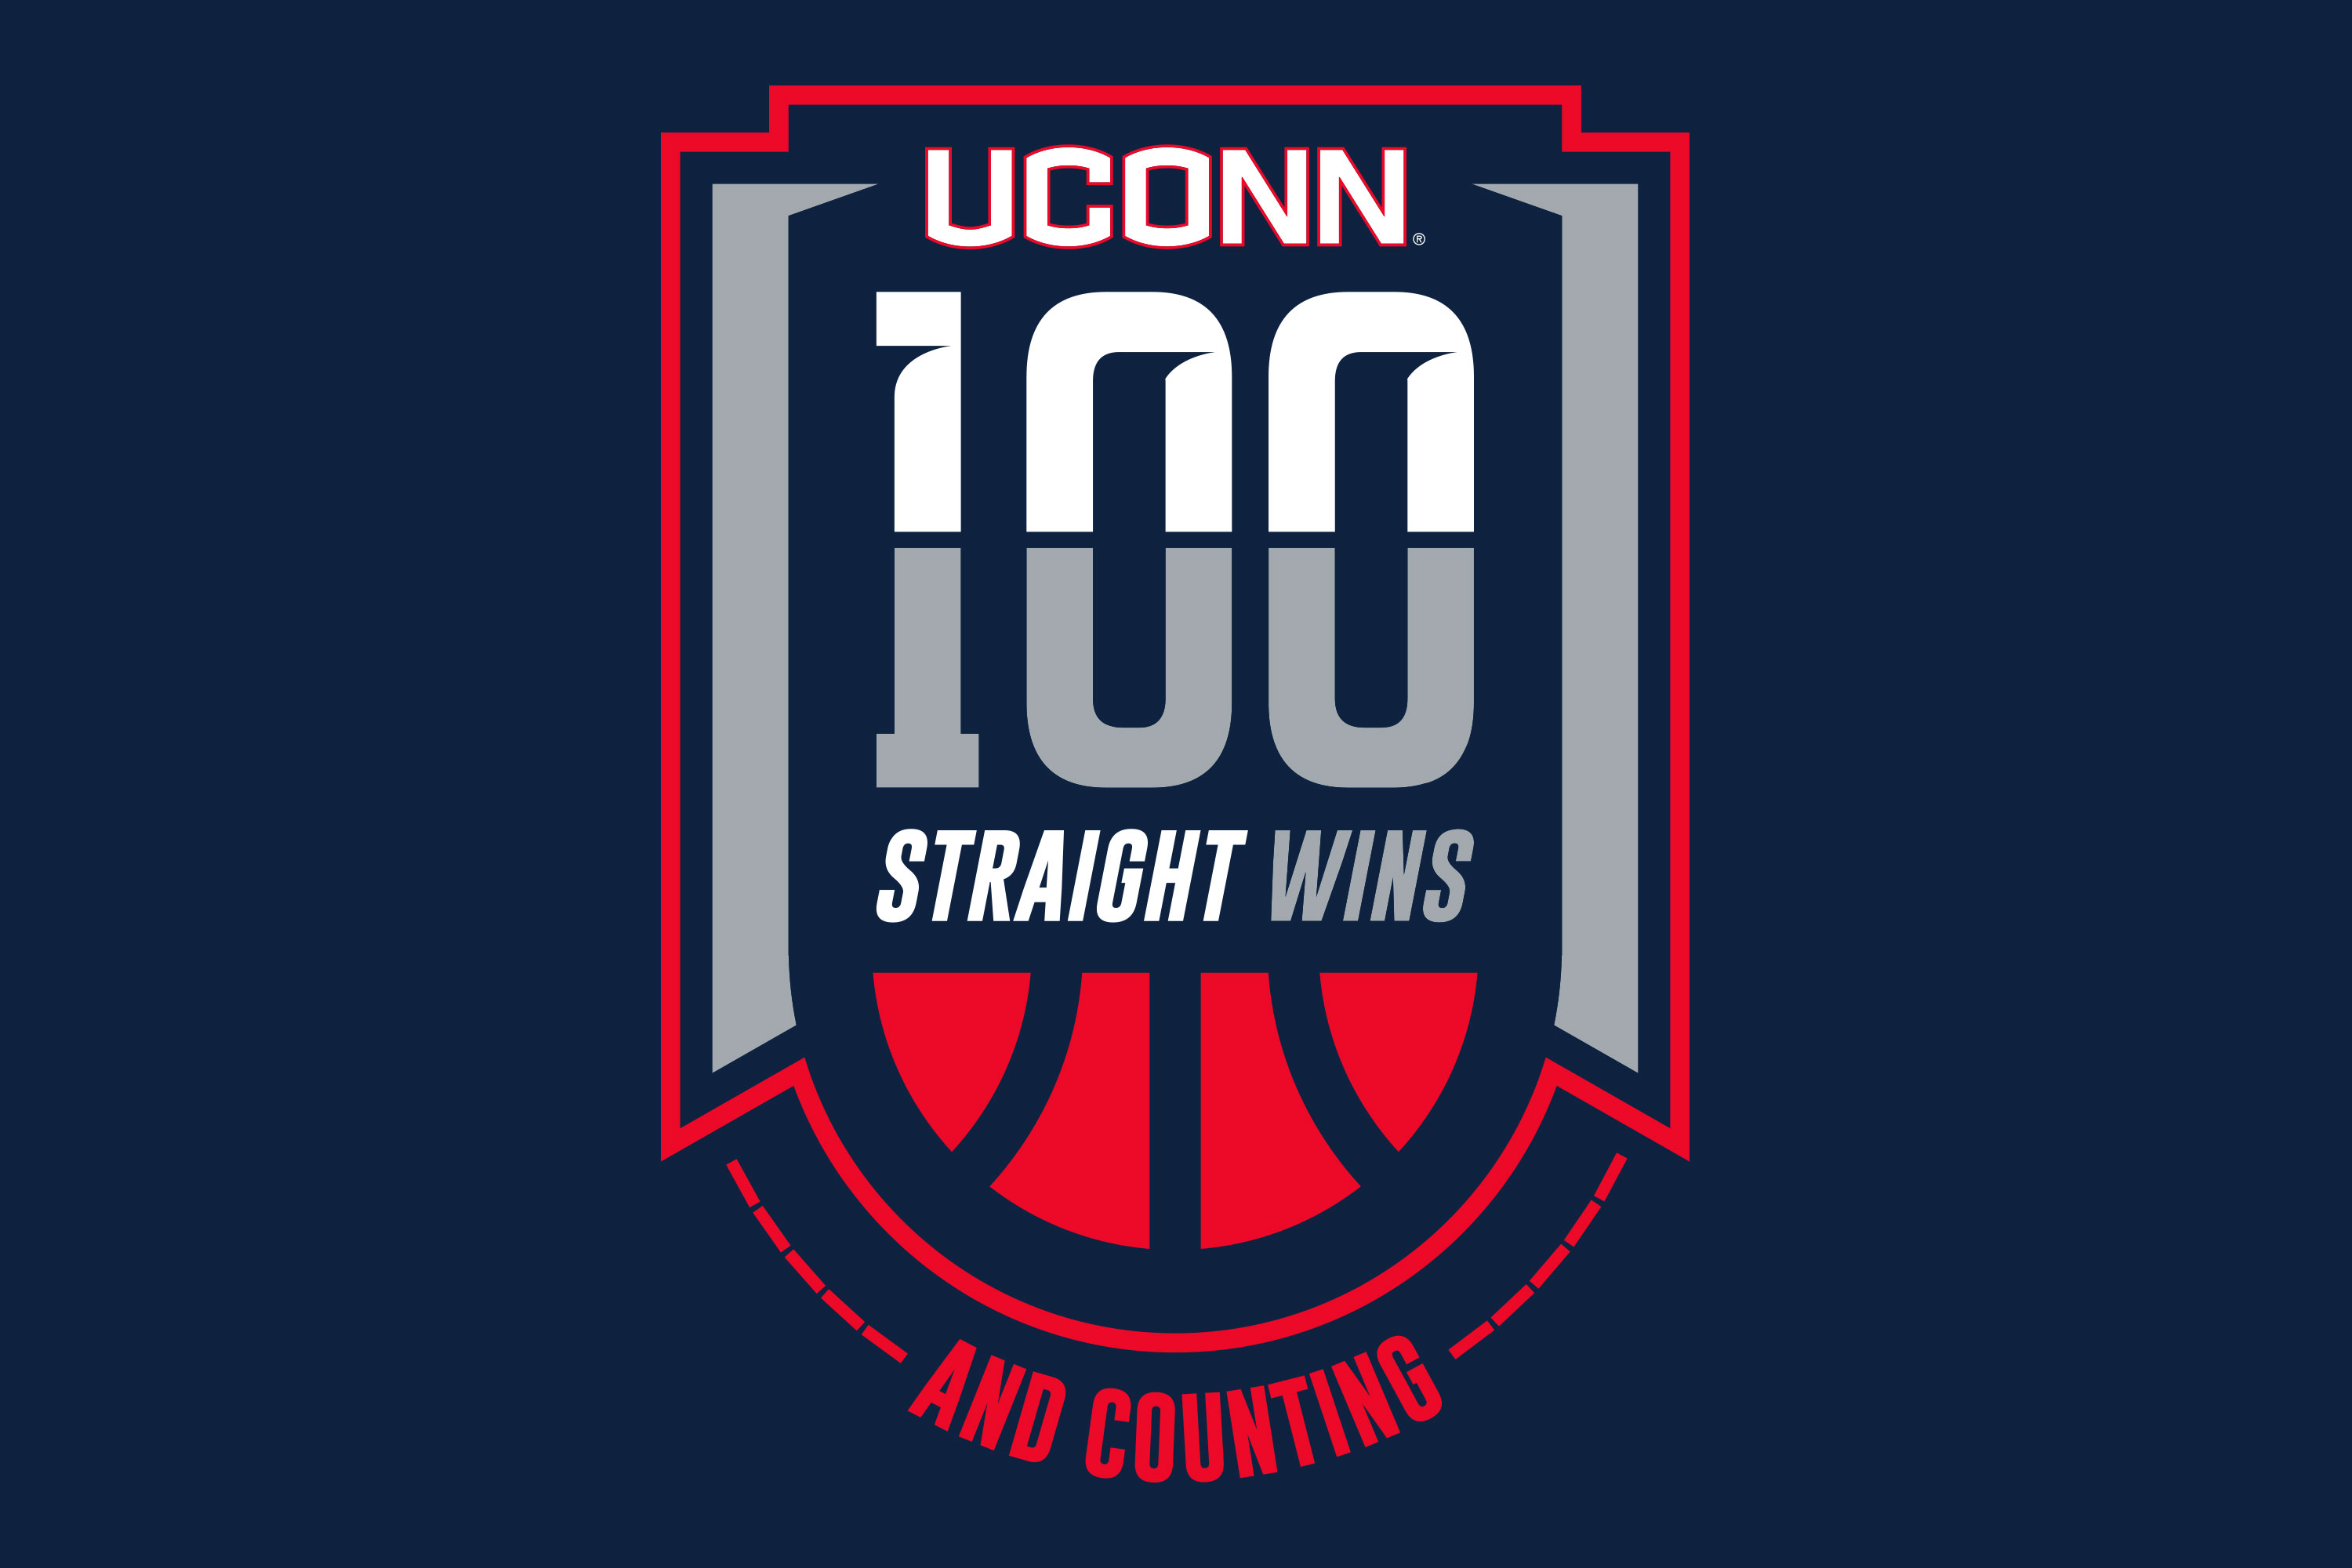 UConn 100 straight wins and counting graphic